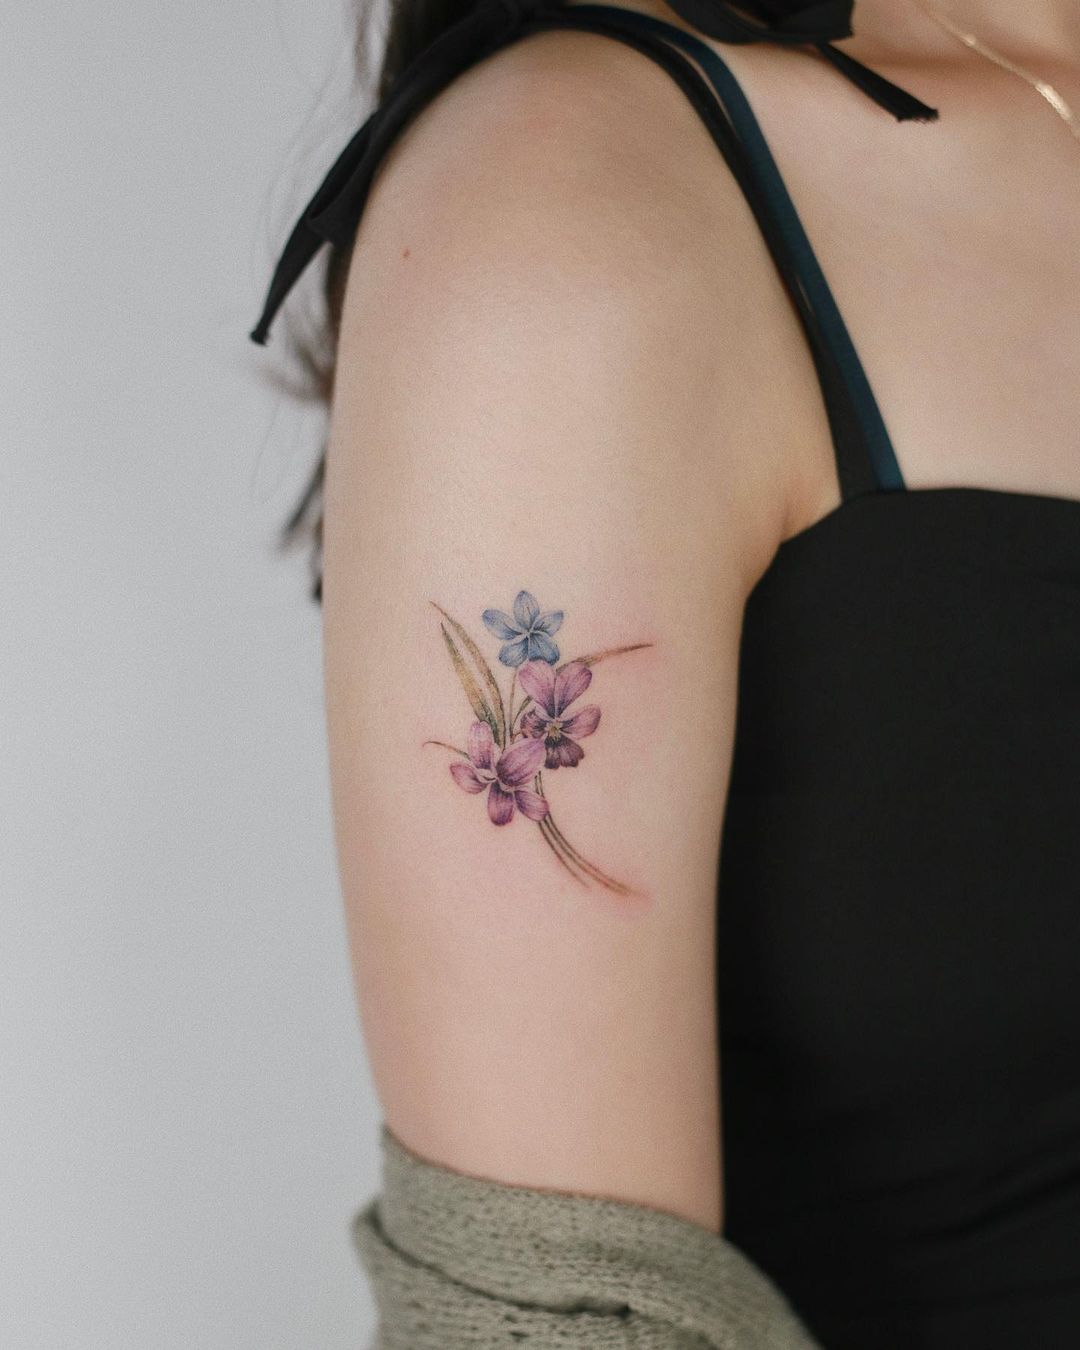 109 Pretty Birth Flower Tattoos And Their Symbolic Meaning